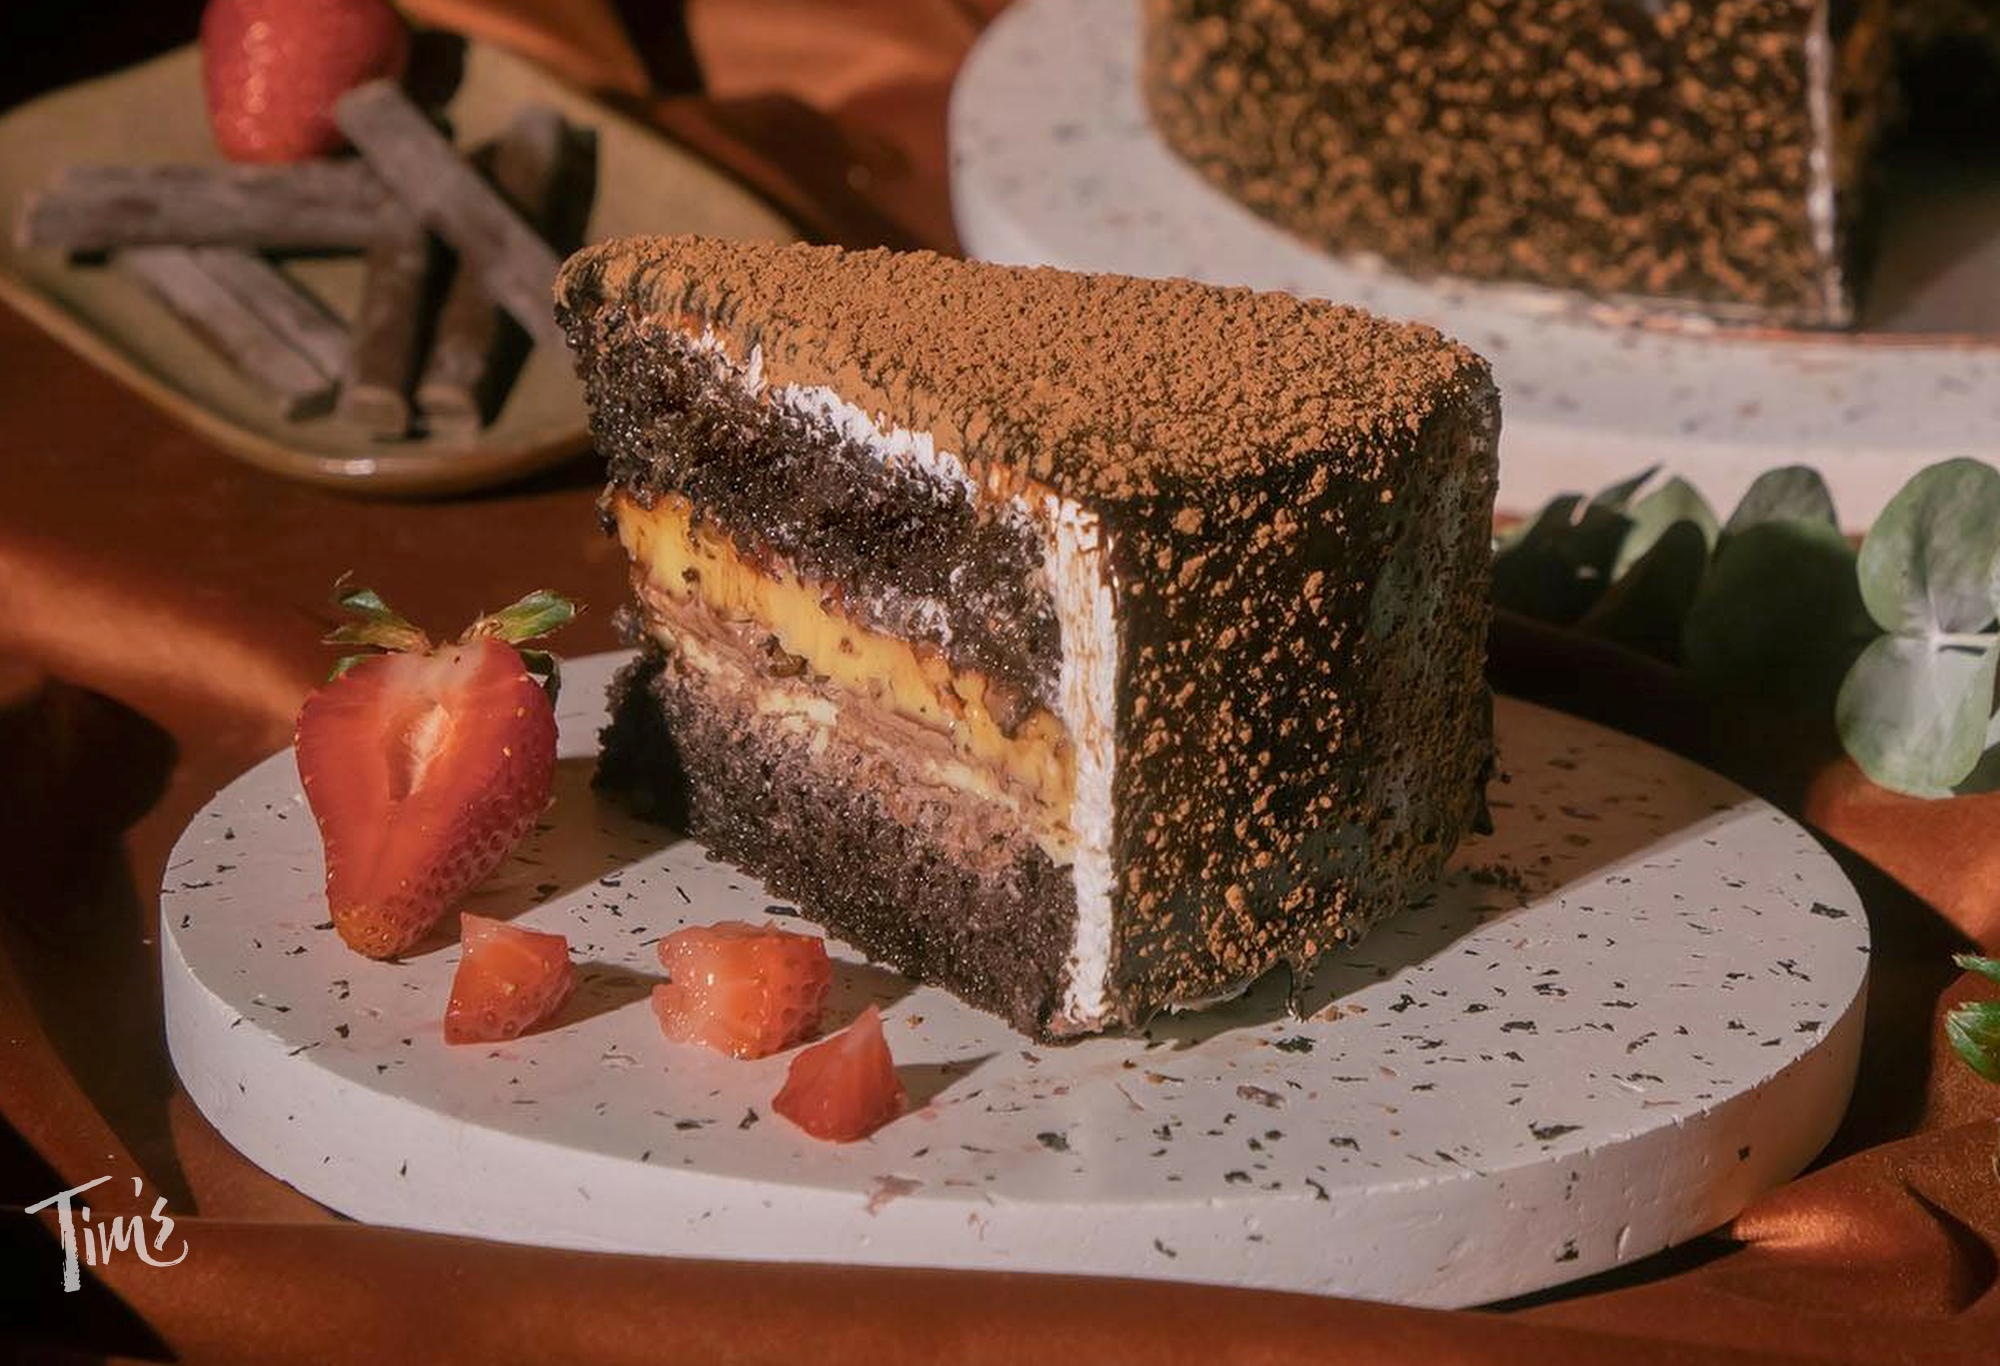 Made with coffee liqueur, filled with Neapolitan flan, chocolate cake, respberry. After that it is covered with chocolate and the final touch is the chocolate sprinkles.